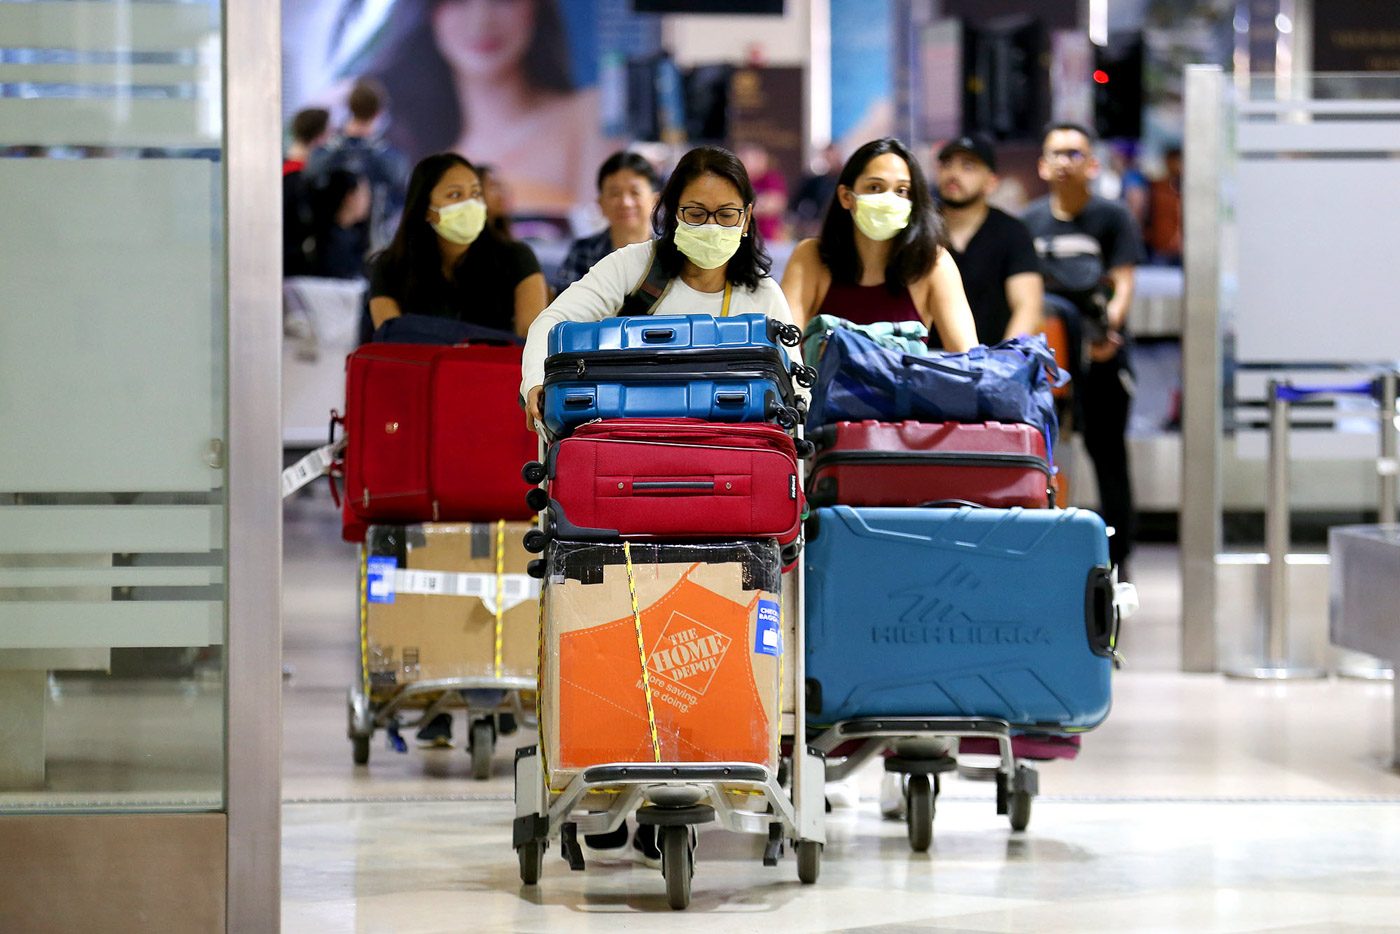 Traveling soon? Here’s how you can protect yourself from the coronavirus